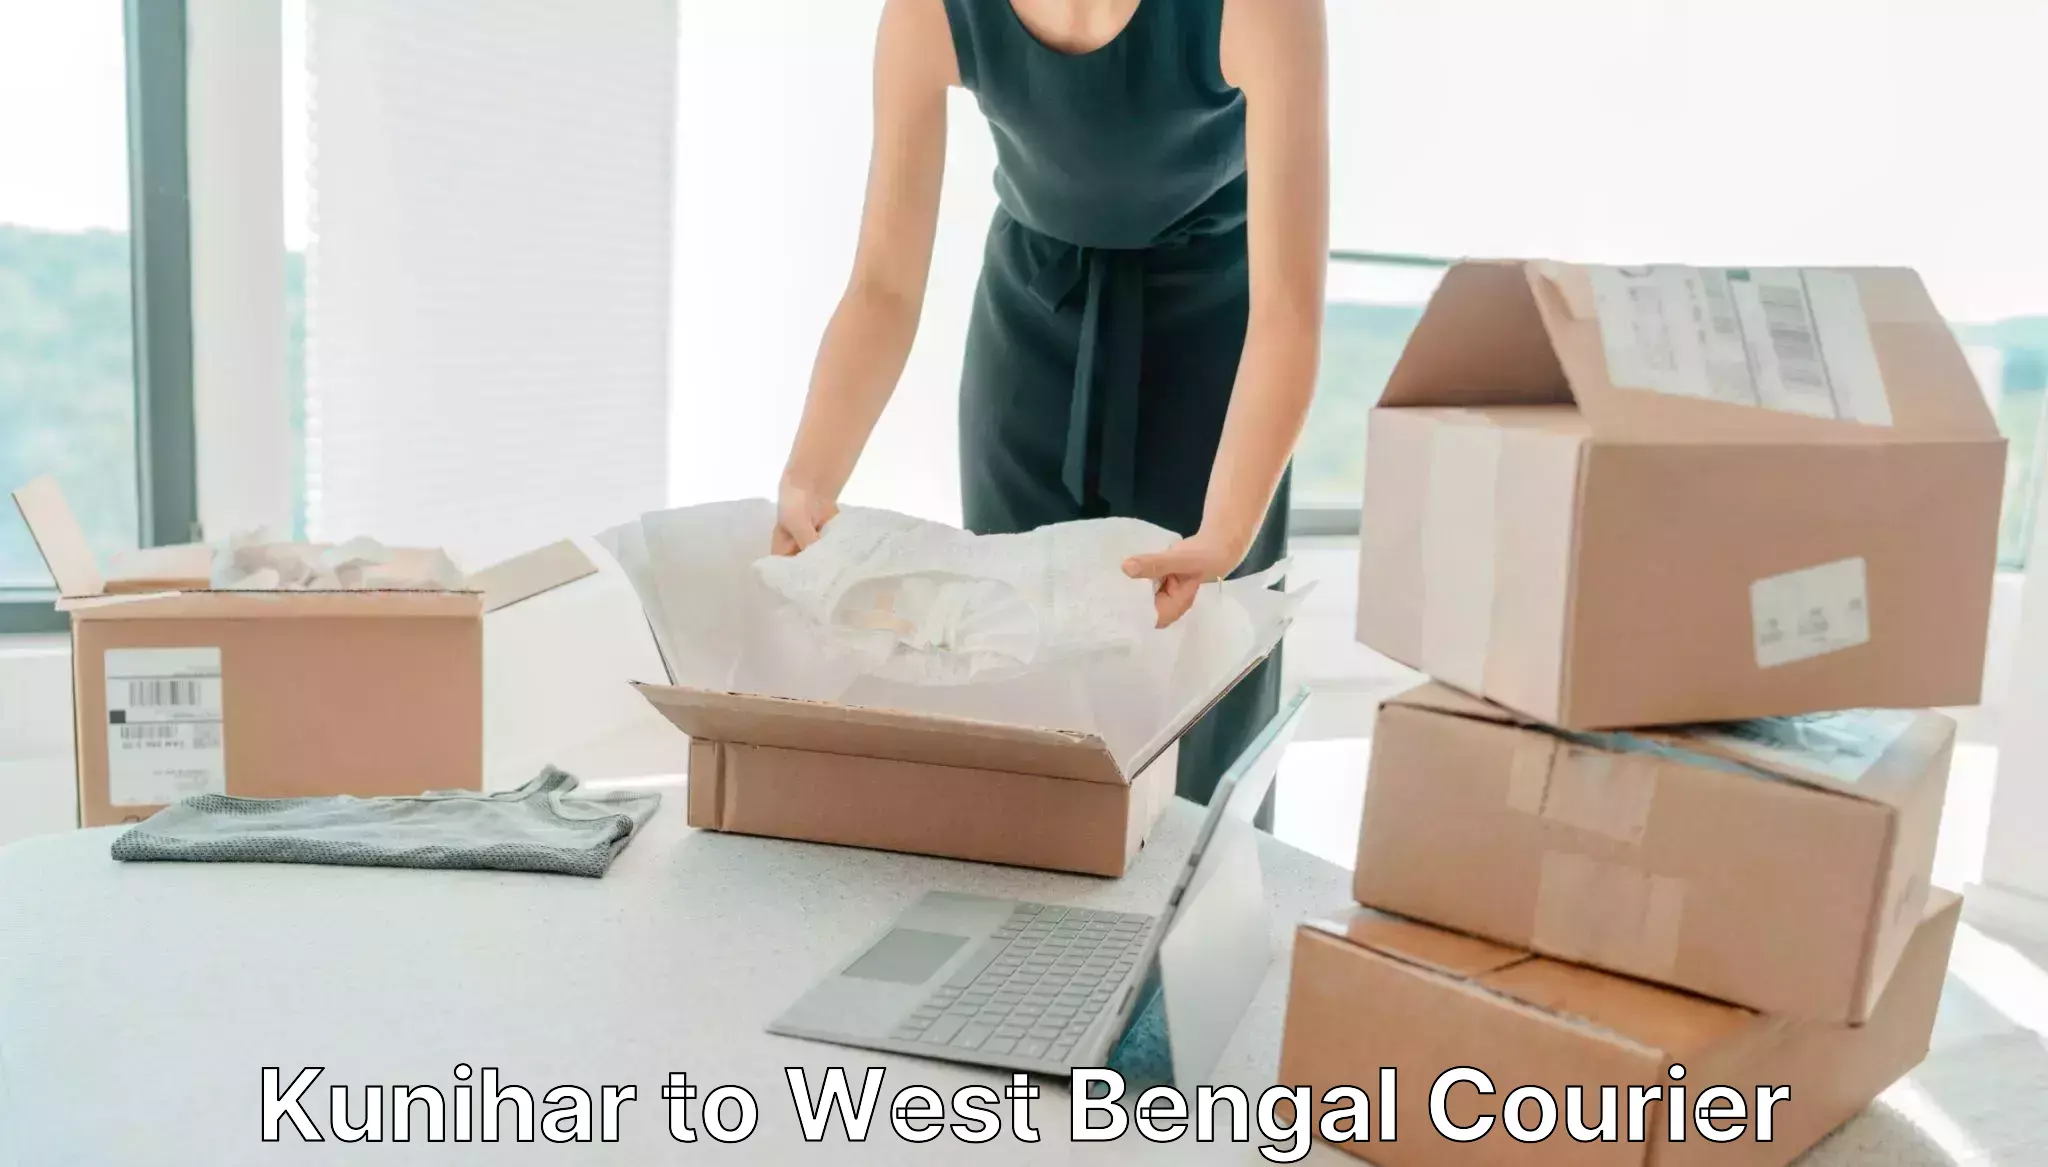 Customizable shipping options Kunihar to West Bengal